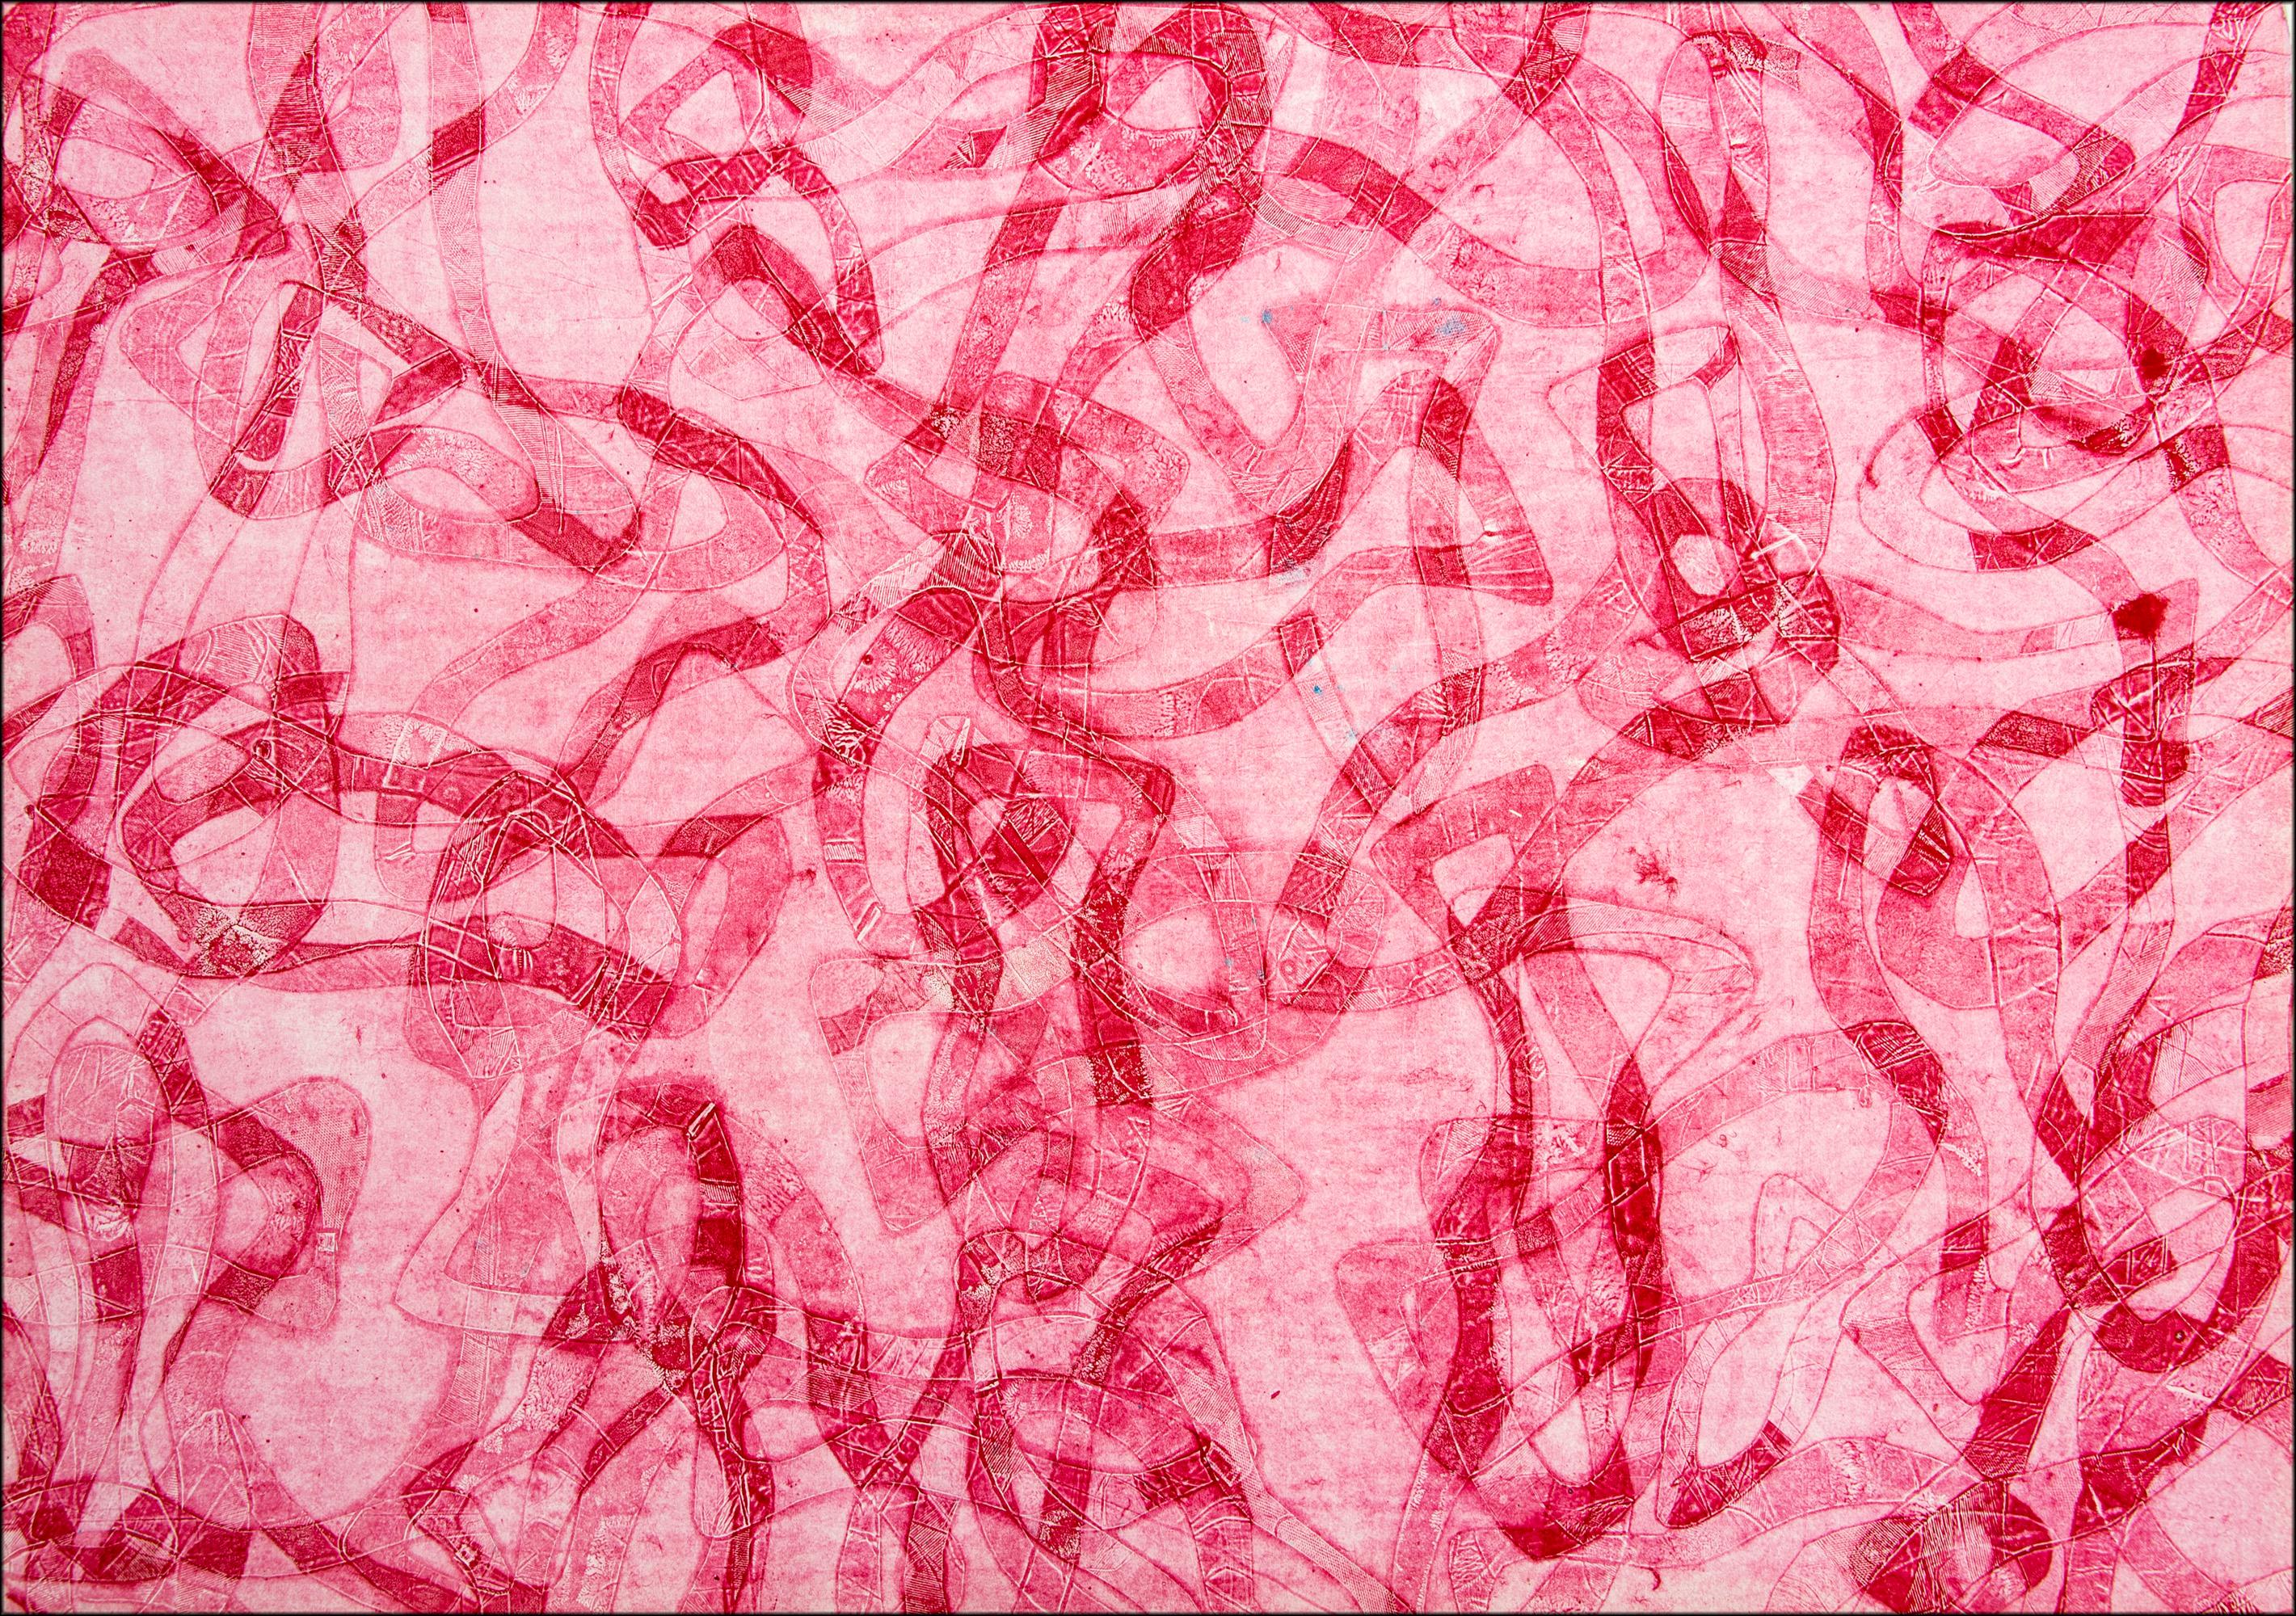 Enric Servera Animal Painting - Red Tones, Abstract Figurative Painting of Red Sea Fishes Patterns on Paper 